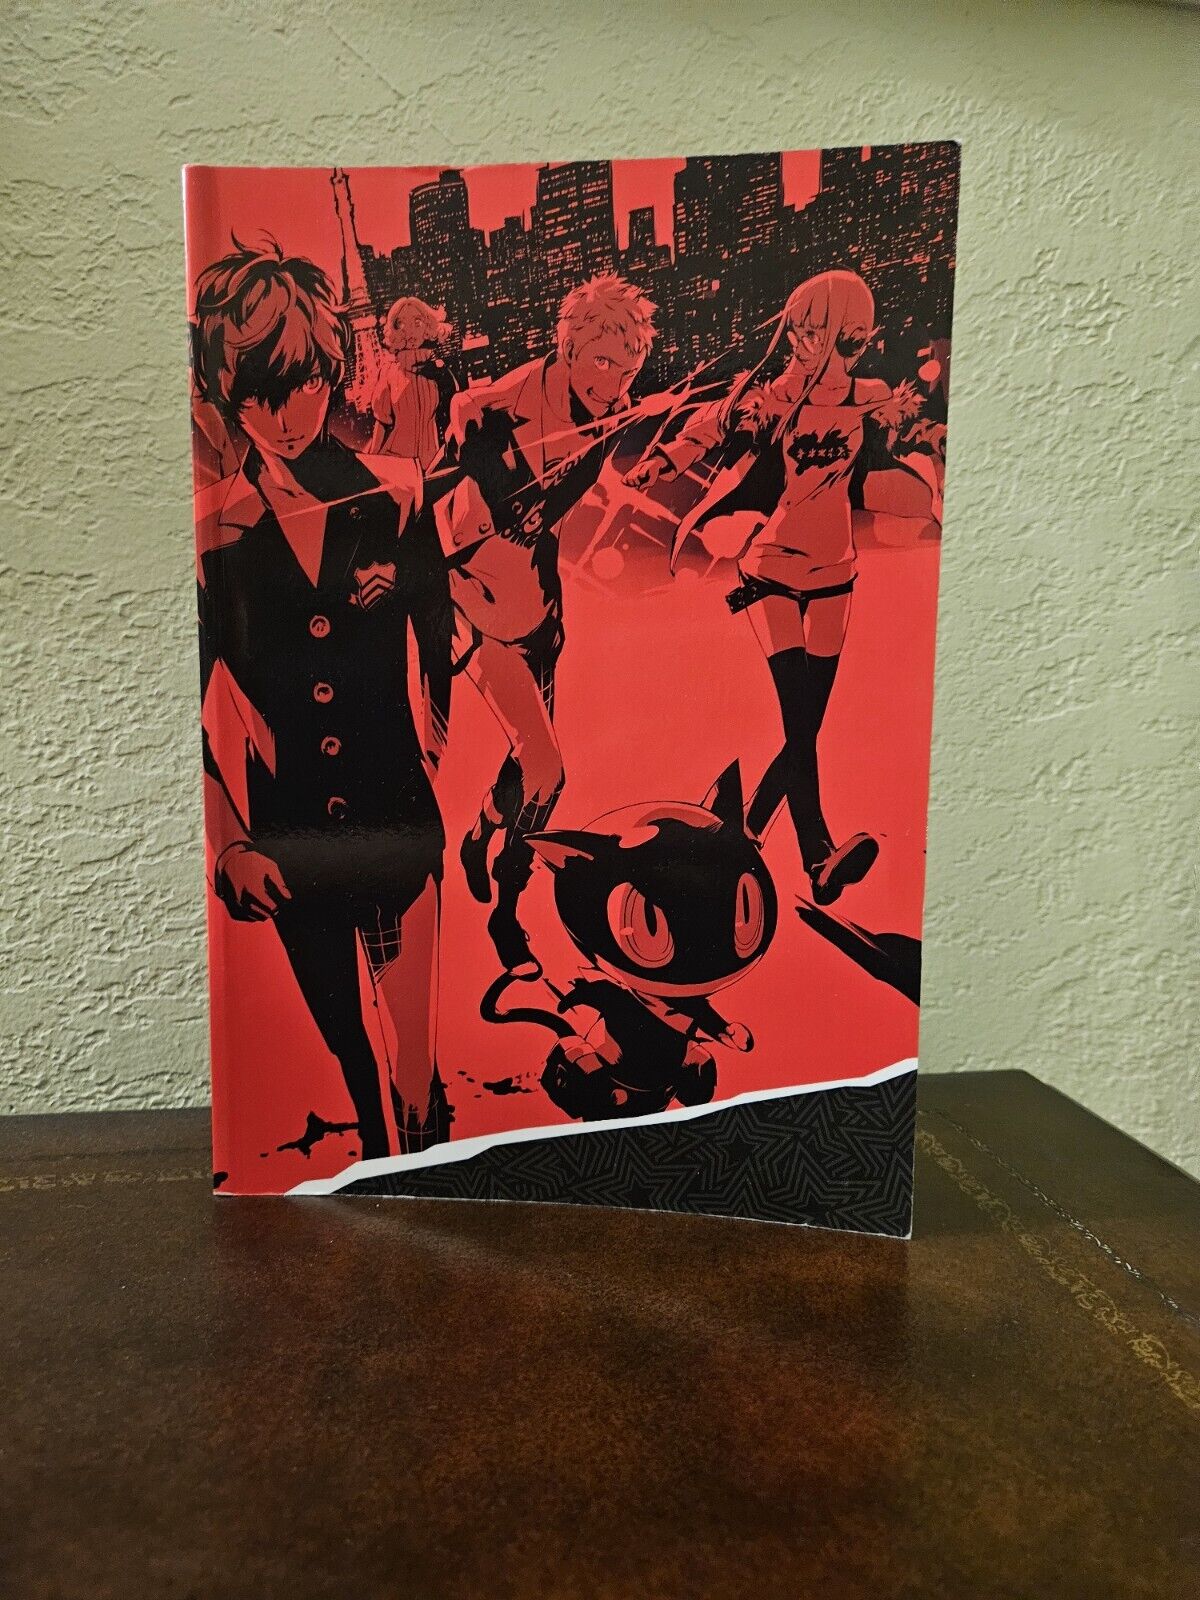 The Art of Persona 5 (2017) English art book, Used, no dust cover